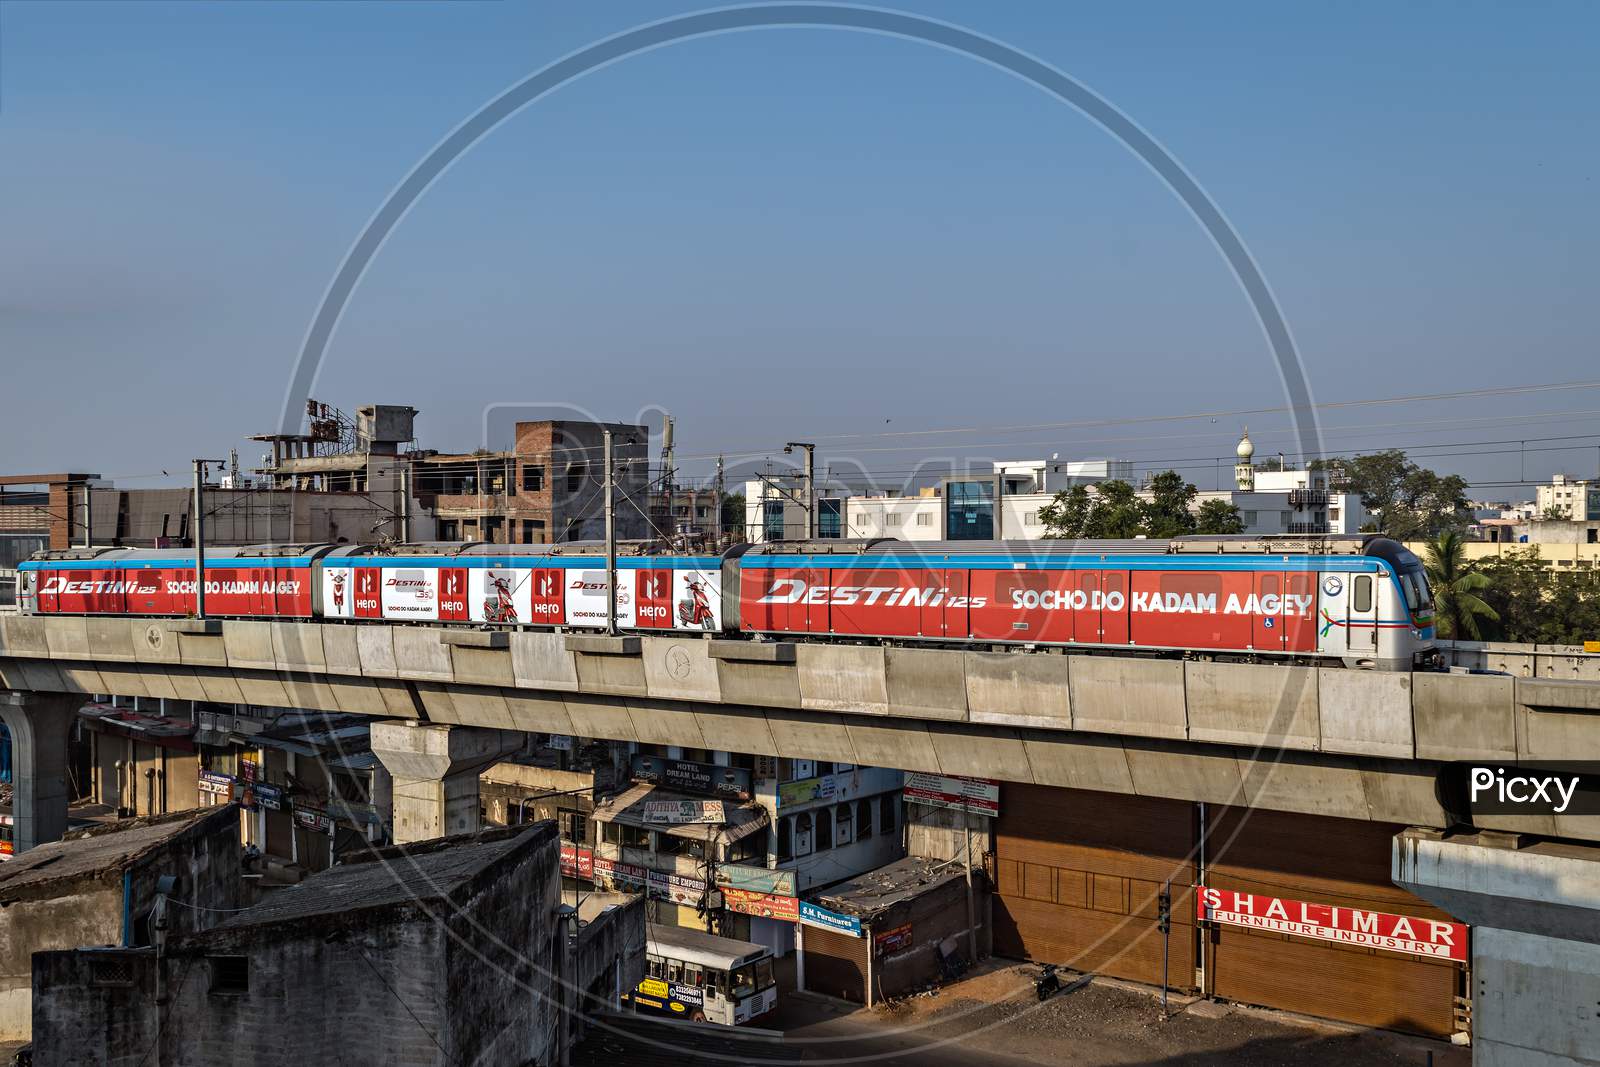 Rapid Transit Hyderabad Metro Train Enter Nampally Station In The Morning. The Service Has Successfully Completed One Year In 2019